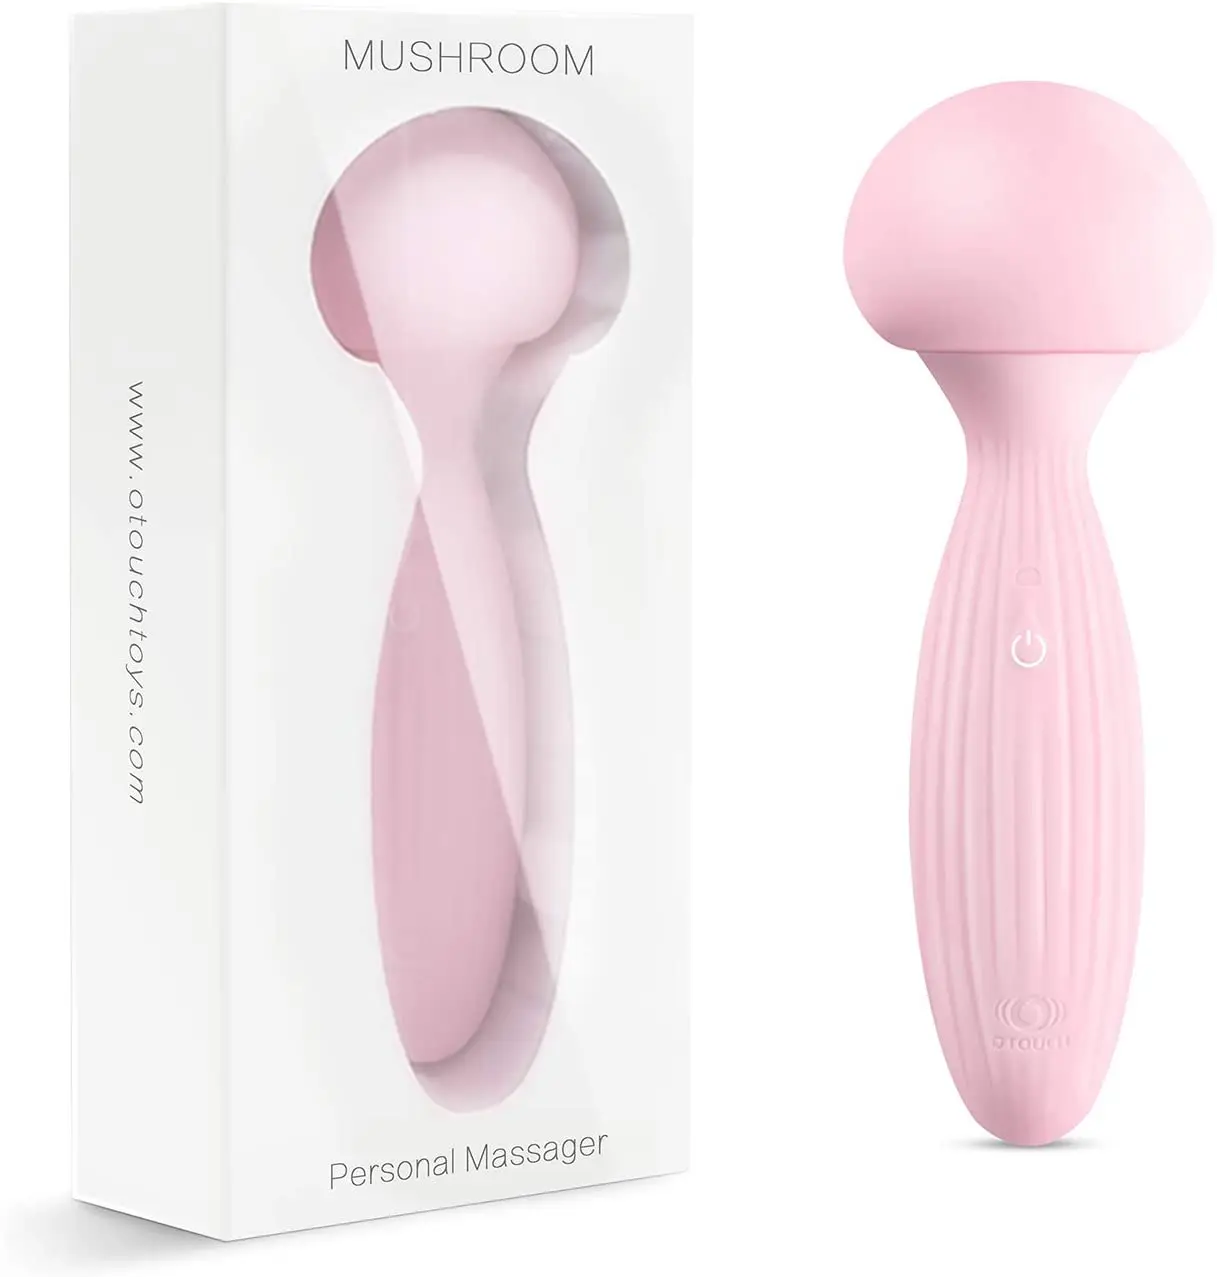 

Mini Handheld Personal Mushroom Wand Massager with 7 Vibration Modes for G-spot and Nipple and any other body part Sex toy